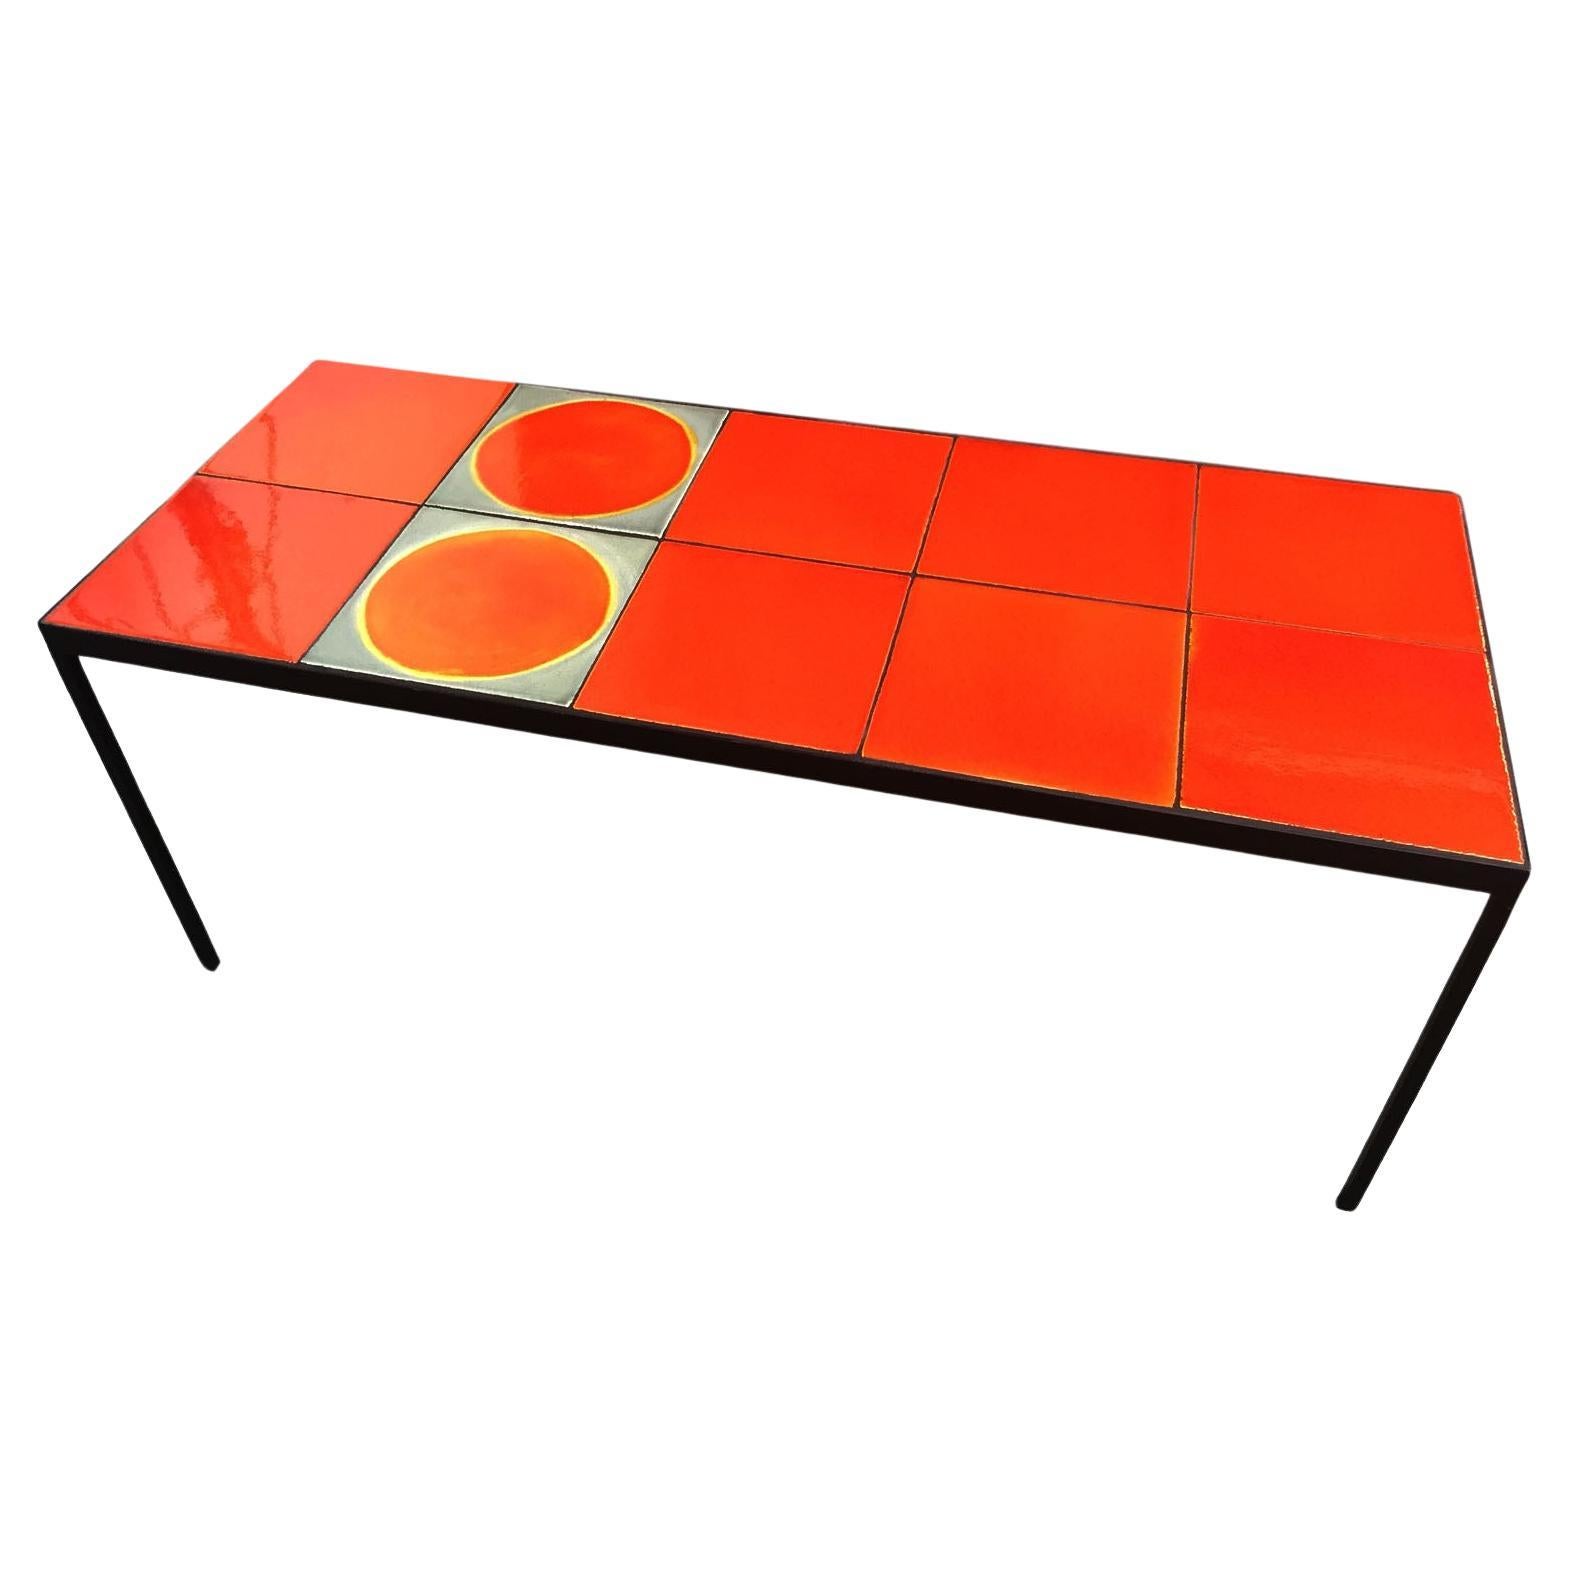 This coffee table is made with 10 ceramic tiles made in the 1970's by Roger Capron, one of the most well-known ceramist of the Modern era.  Each tile is unique, hand-glazed and varied in color and texture. We use these tiles to create tables, coffee